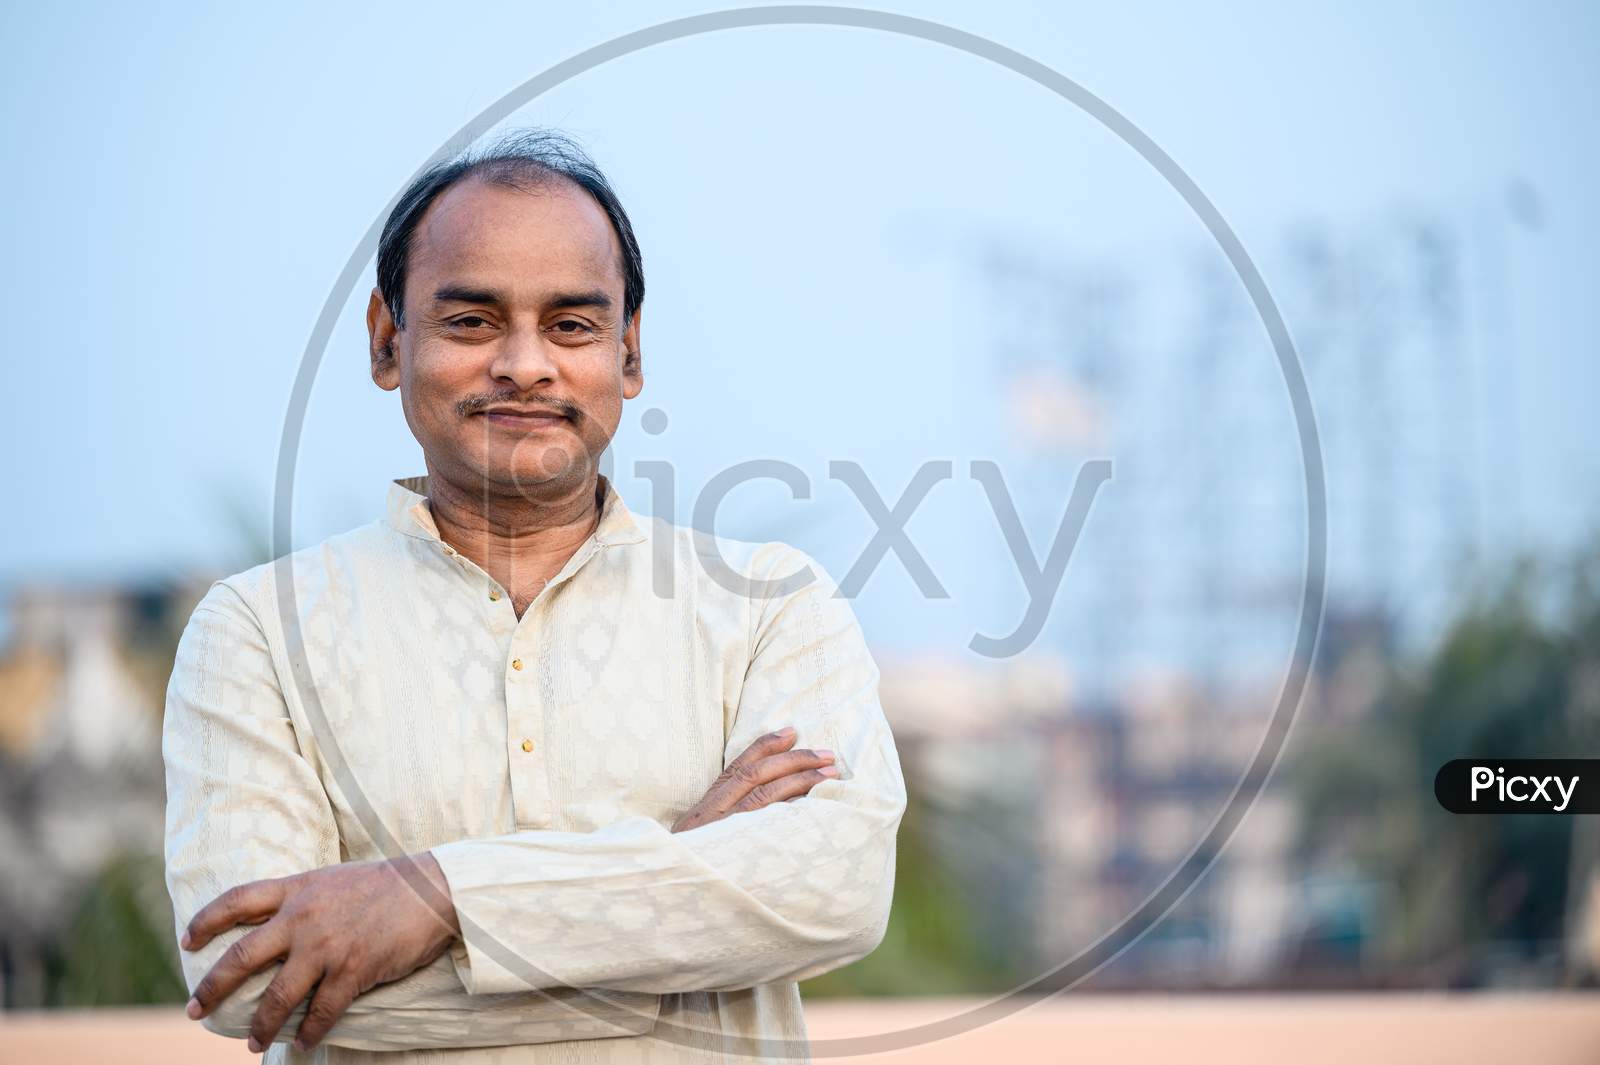 Portrait Of A Middle Aged Indian Man